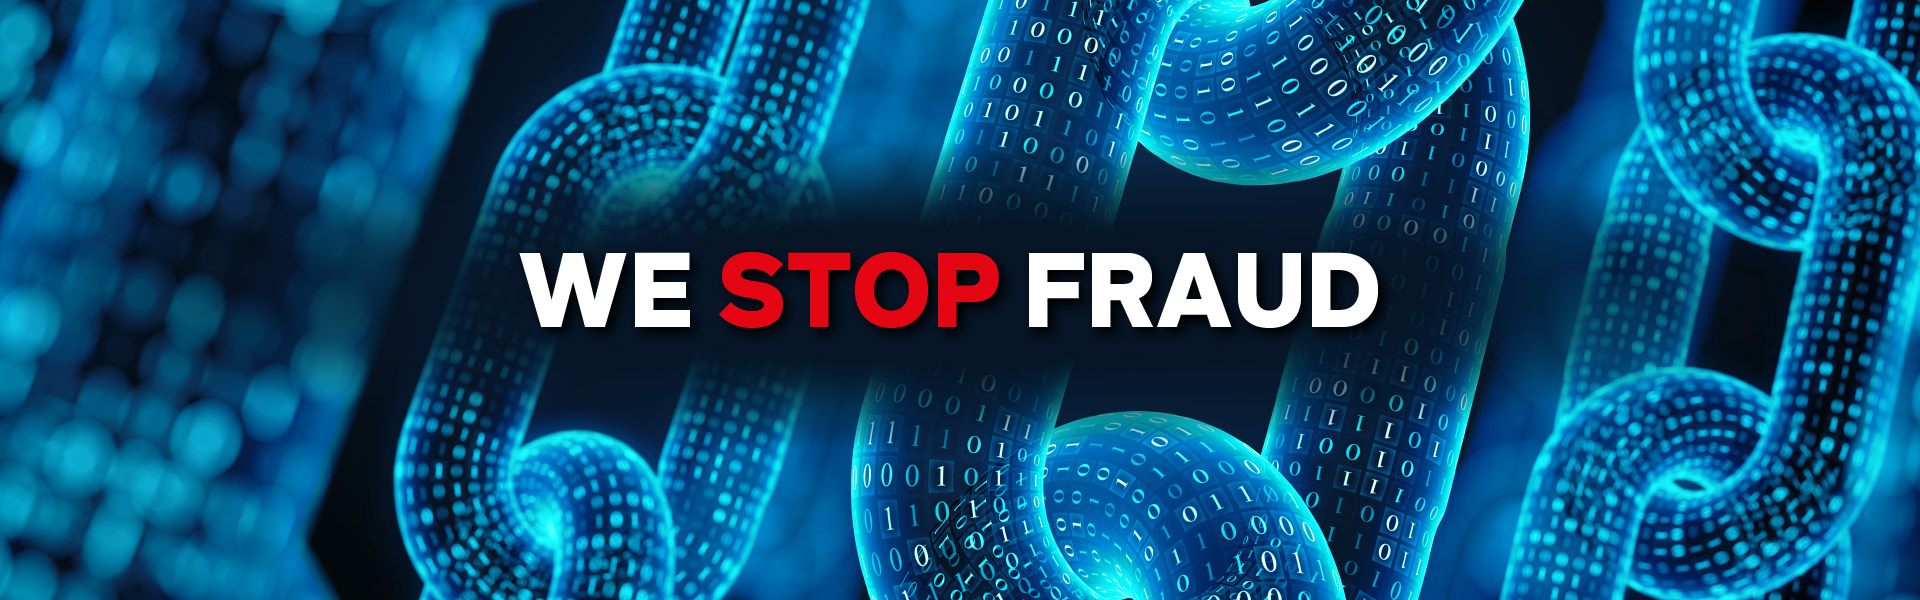 Advanced Secure Technologies - WE-STOP-FRAUD---Home-Page-Banner